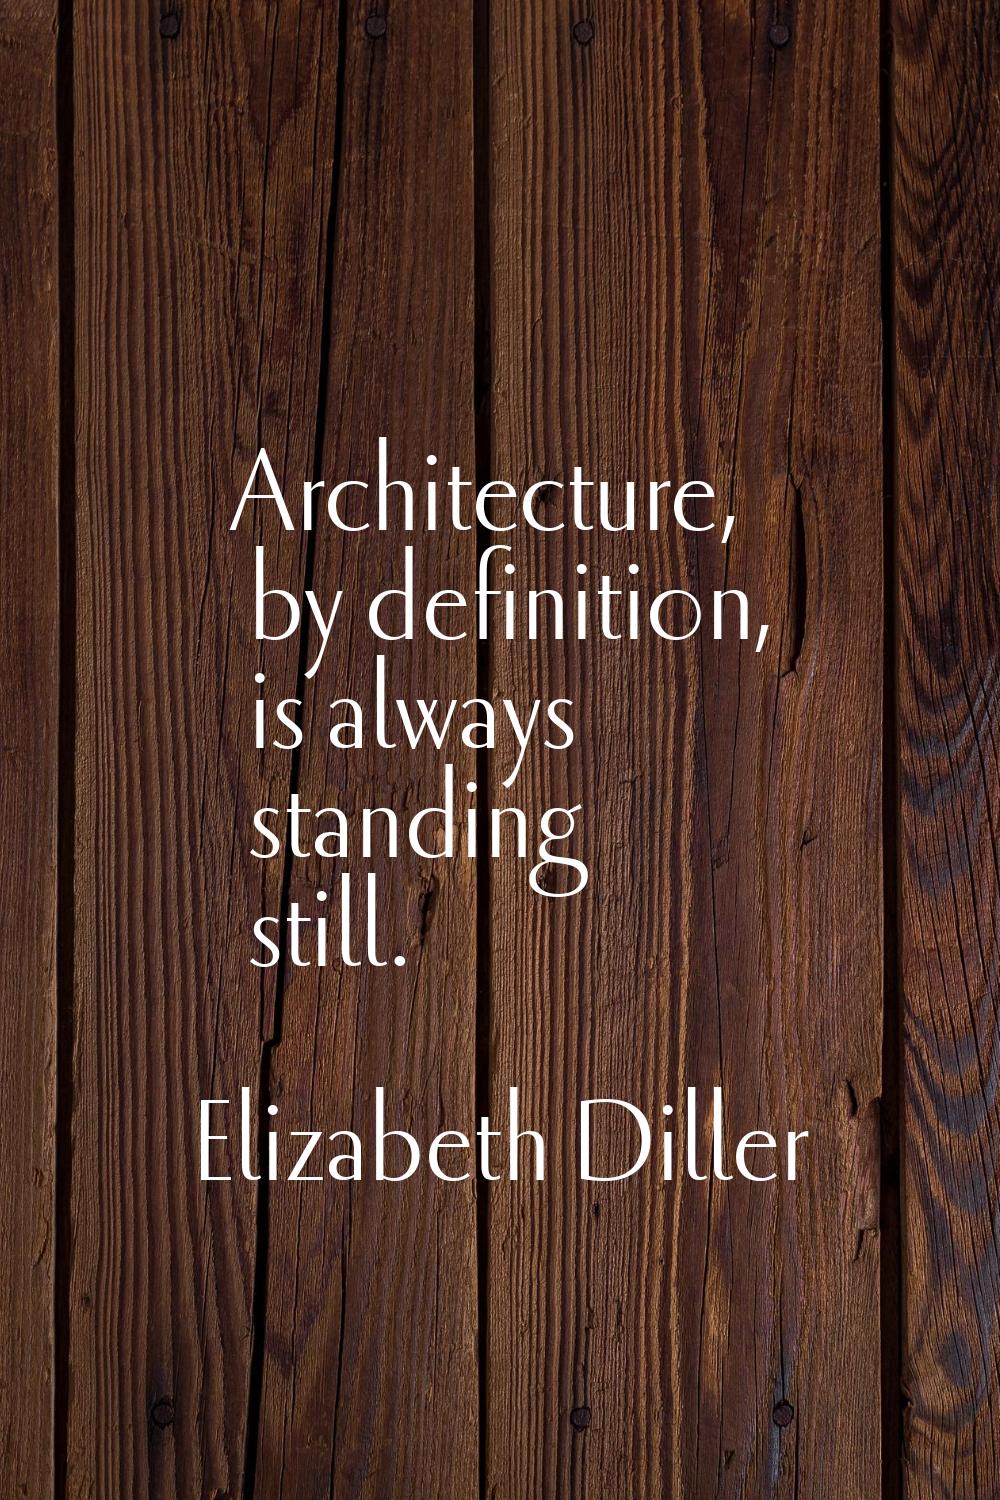 Architecture, by definition, is always standing still.